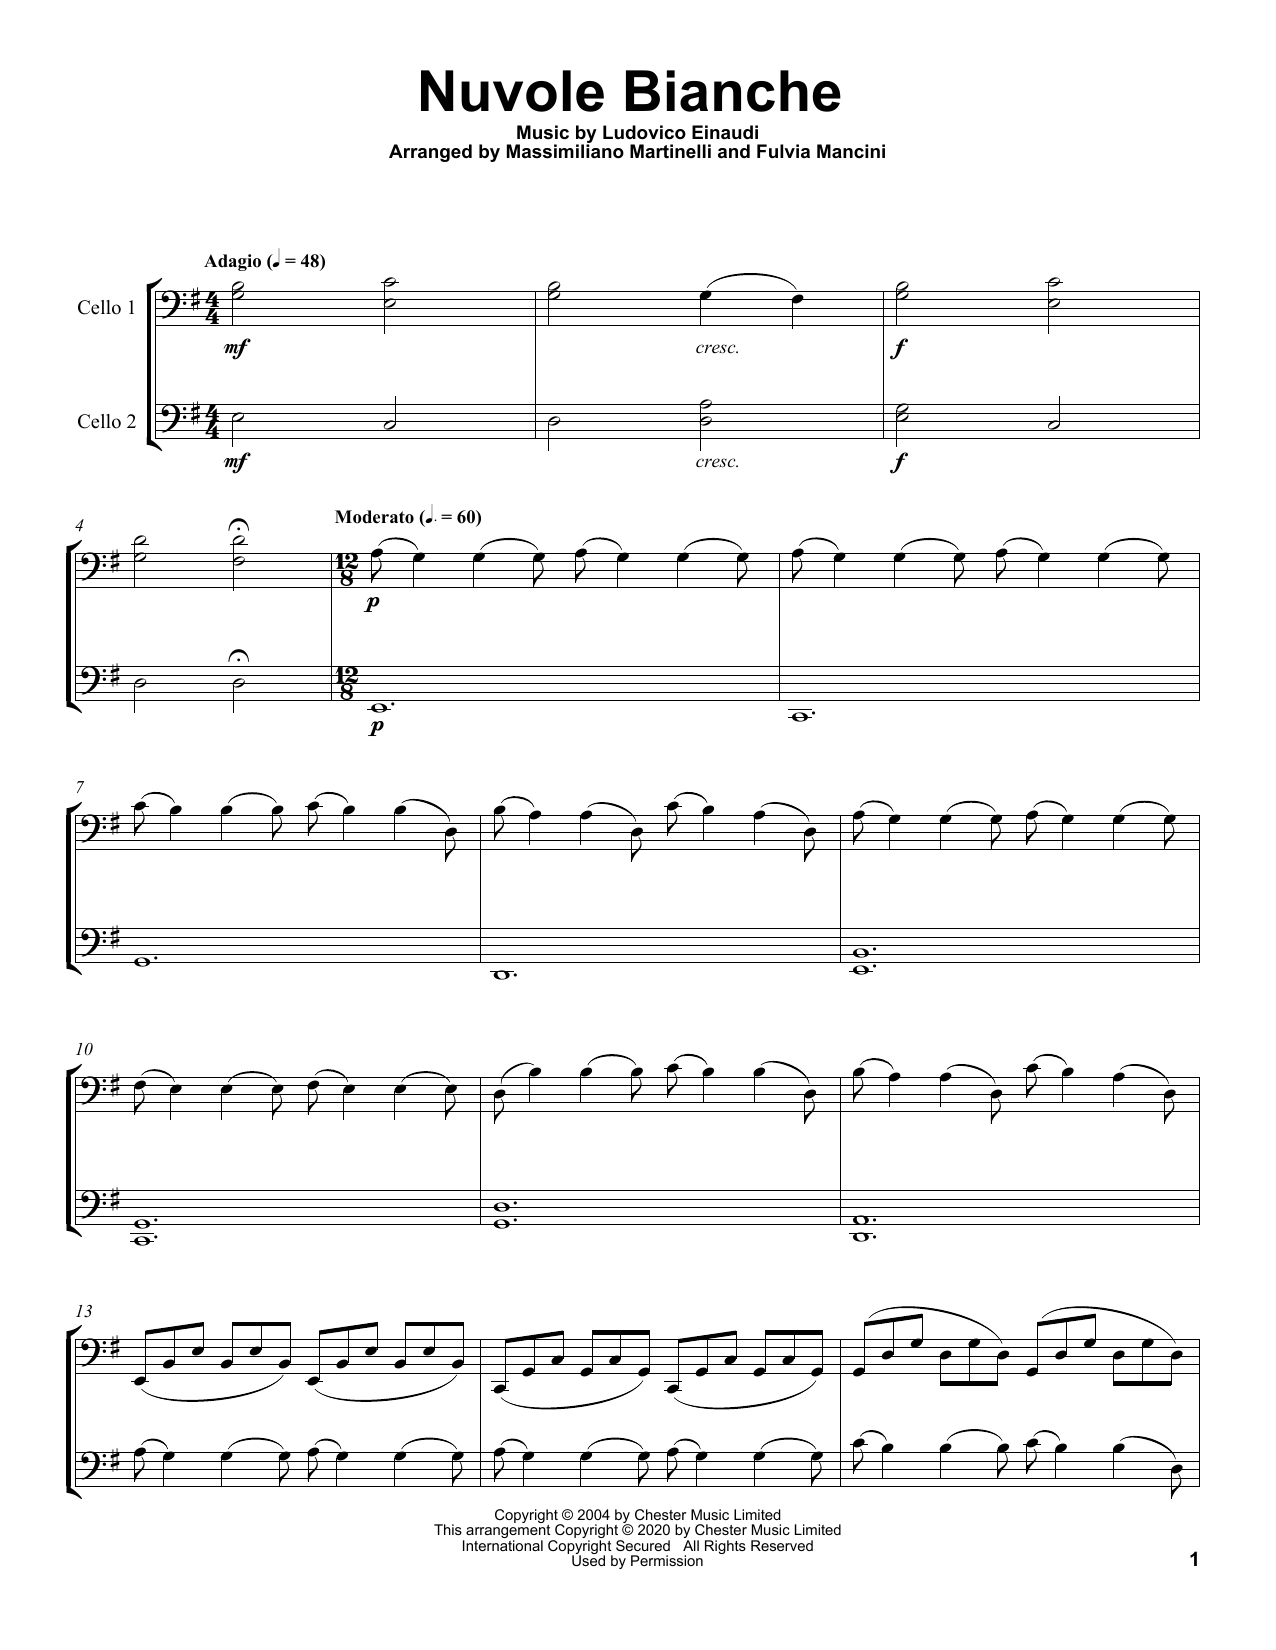 Download Mr. & Mrs. Cello Nuvole Bianche Sheet Music